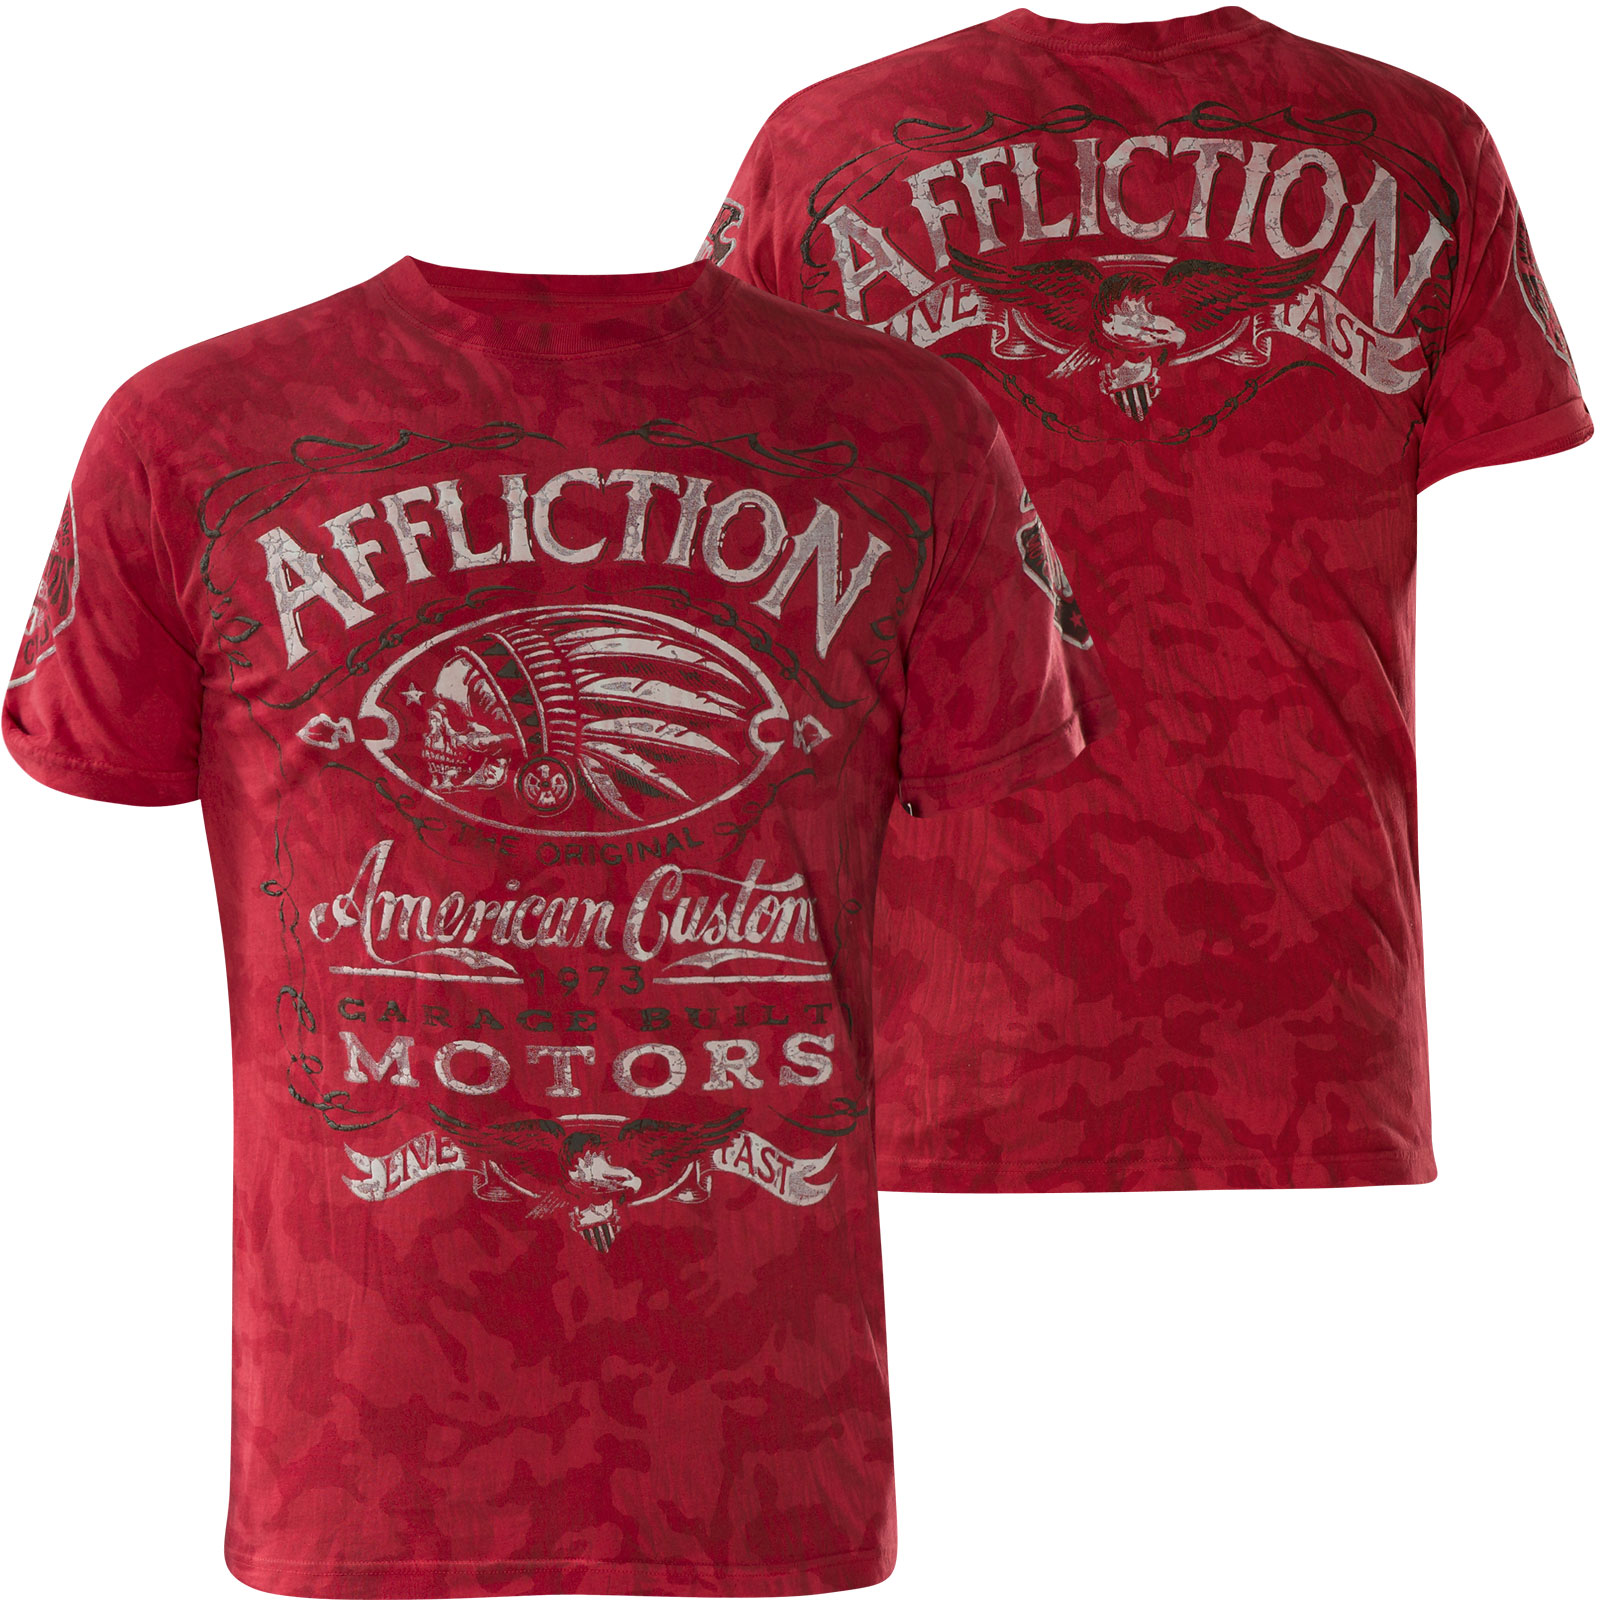 Affliction Prohibition T-Shirt Print featuring a heraldric animal